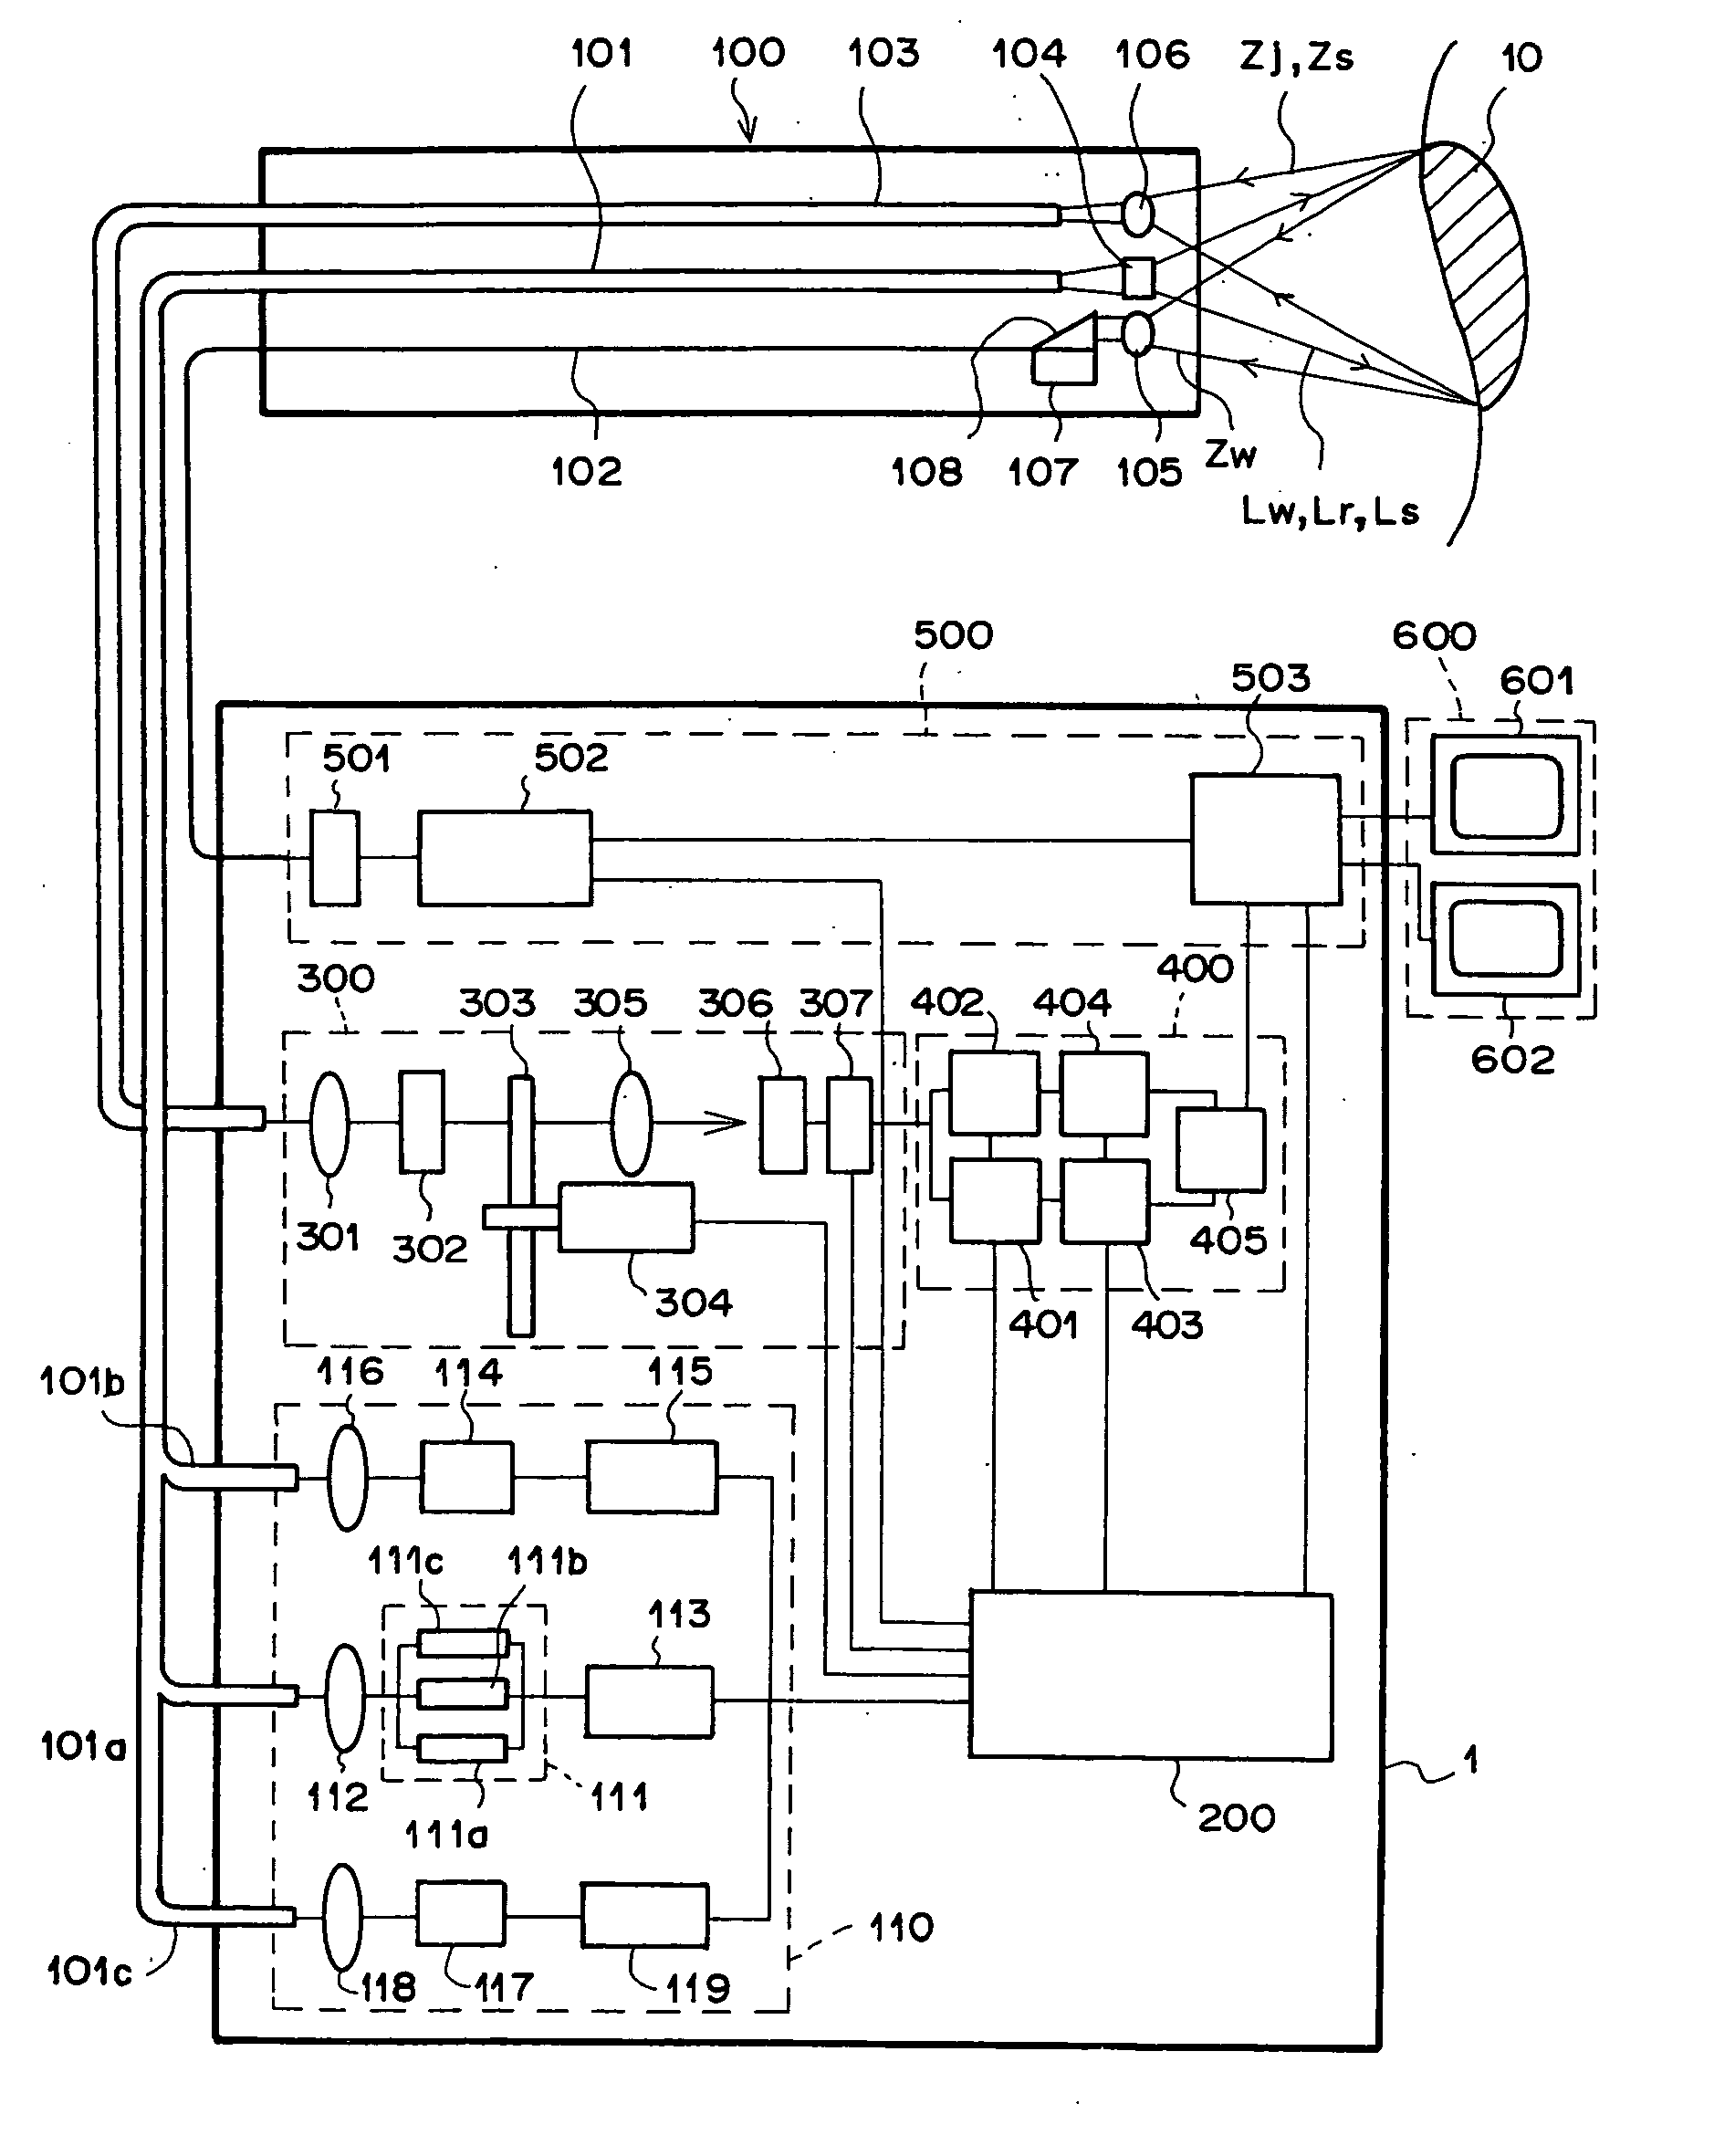 Endoscope system having multiaxial-mode laser-light source or substantially producing multiaxial-mode laser light from single-axial-mode laser light